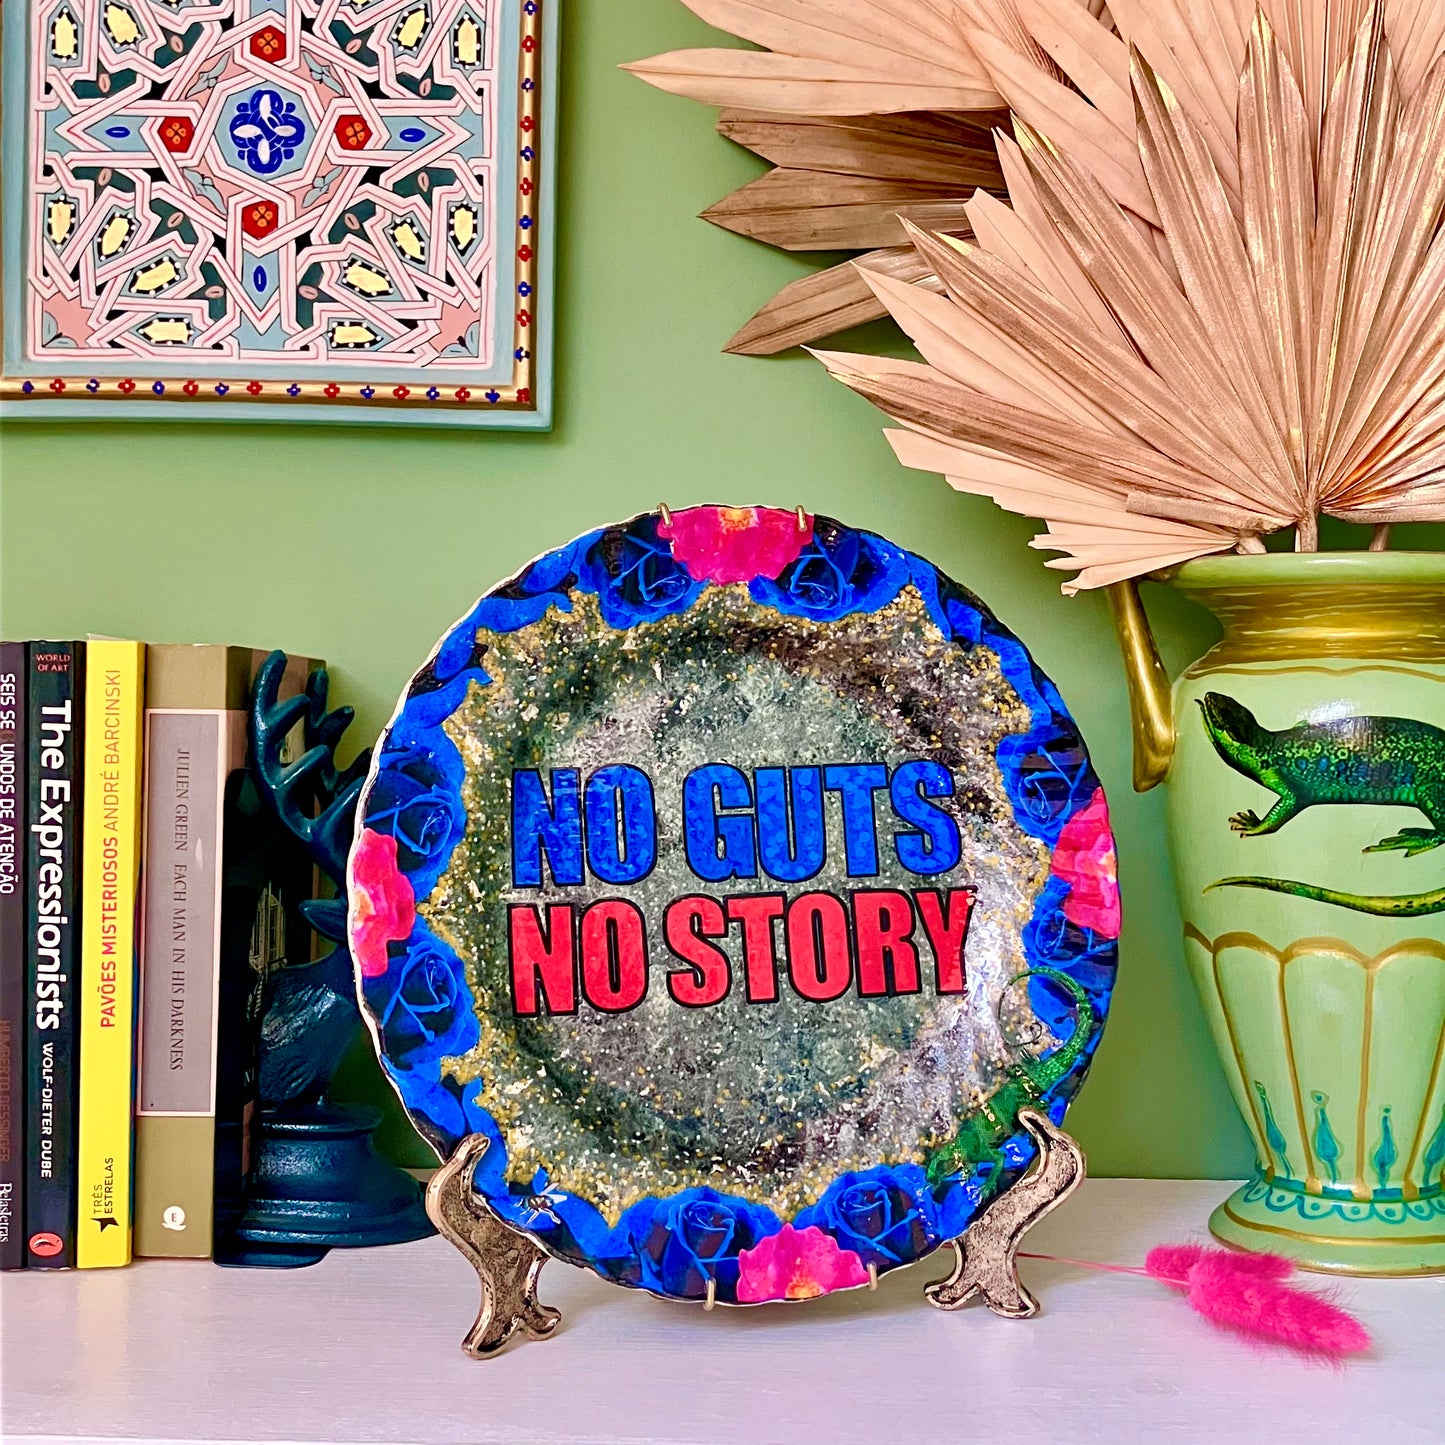 Grey Upcycled Wall Plate - “No Guts No Story” - by House of Frisson